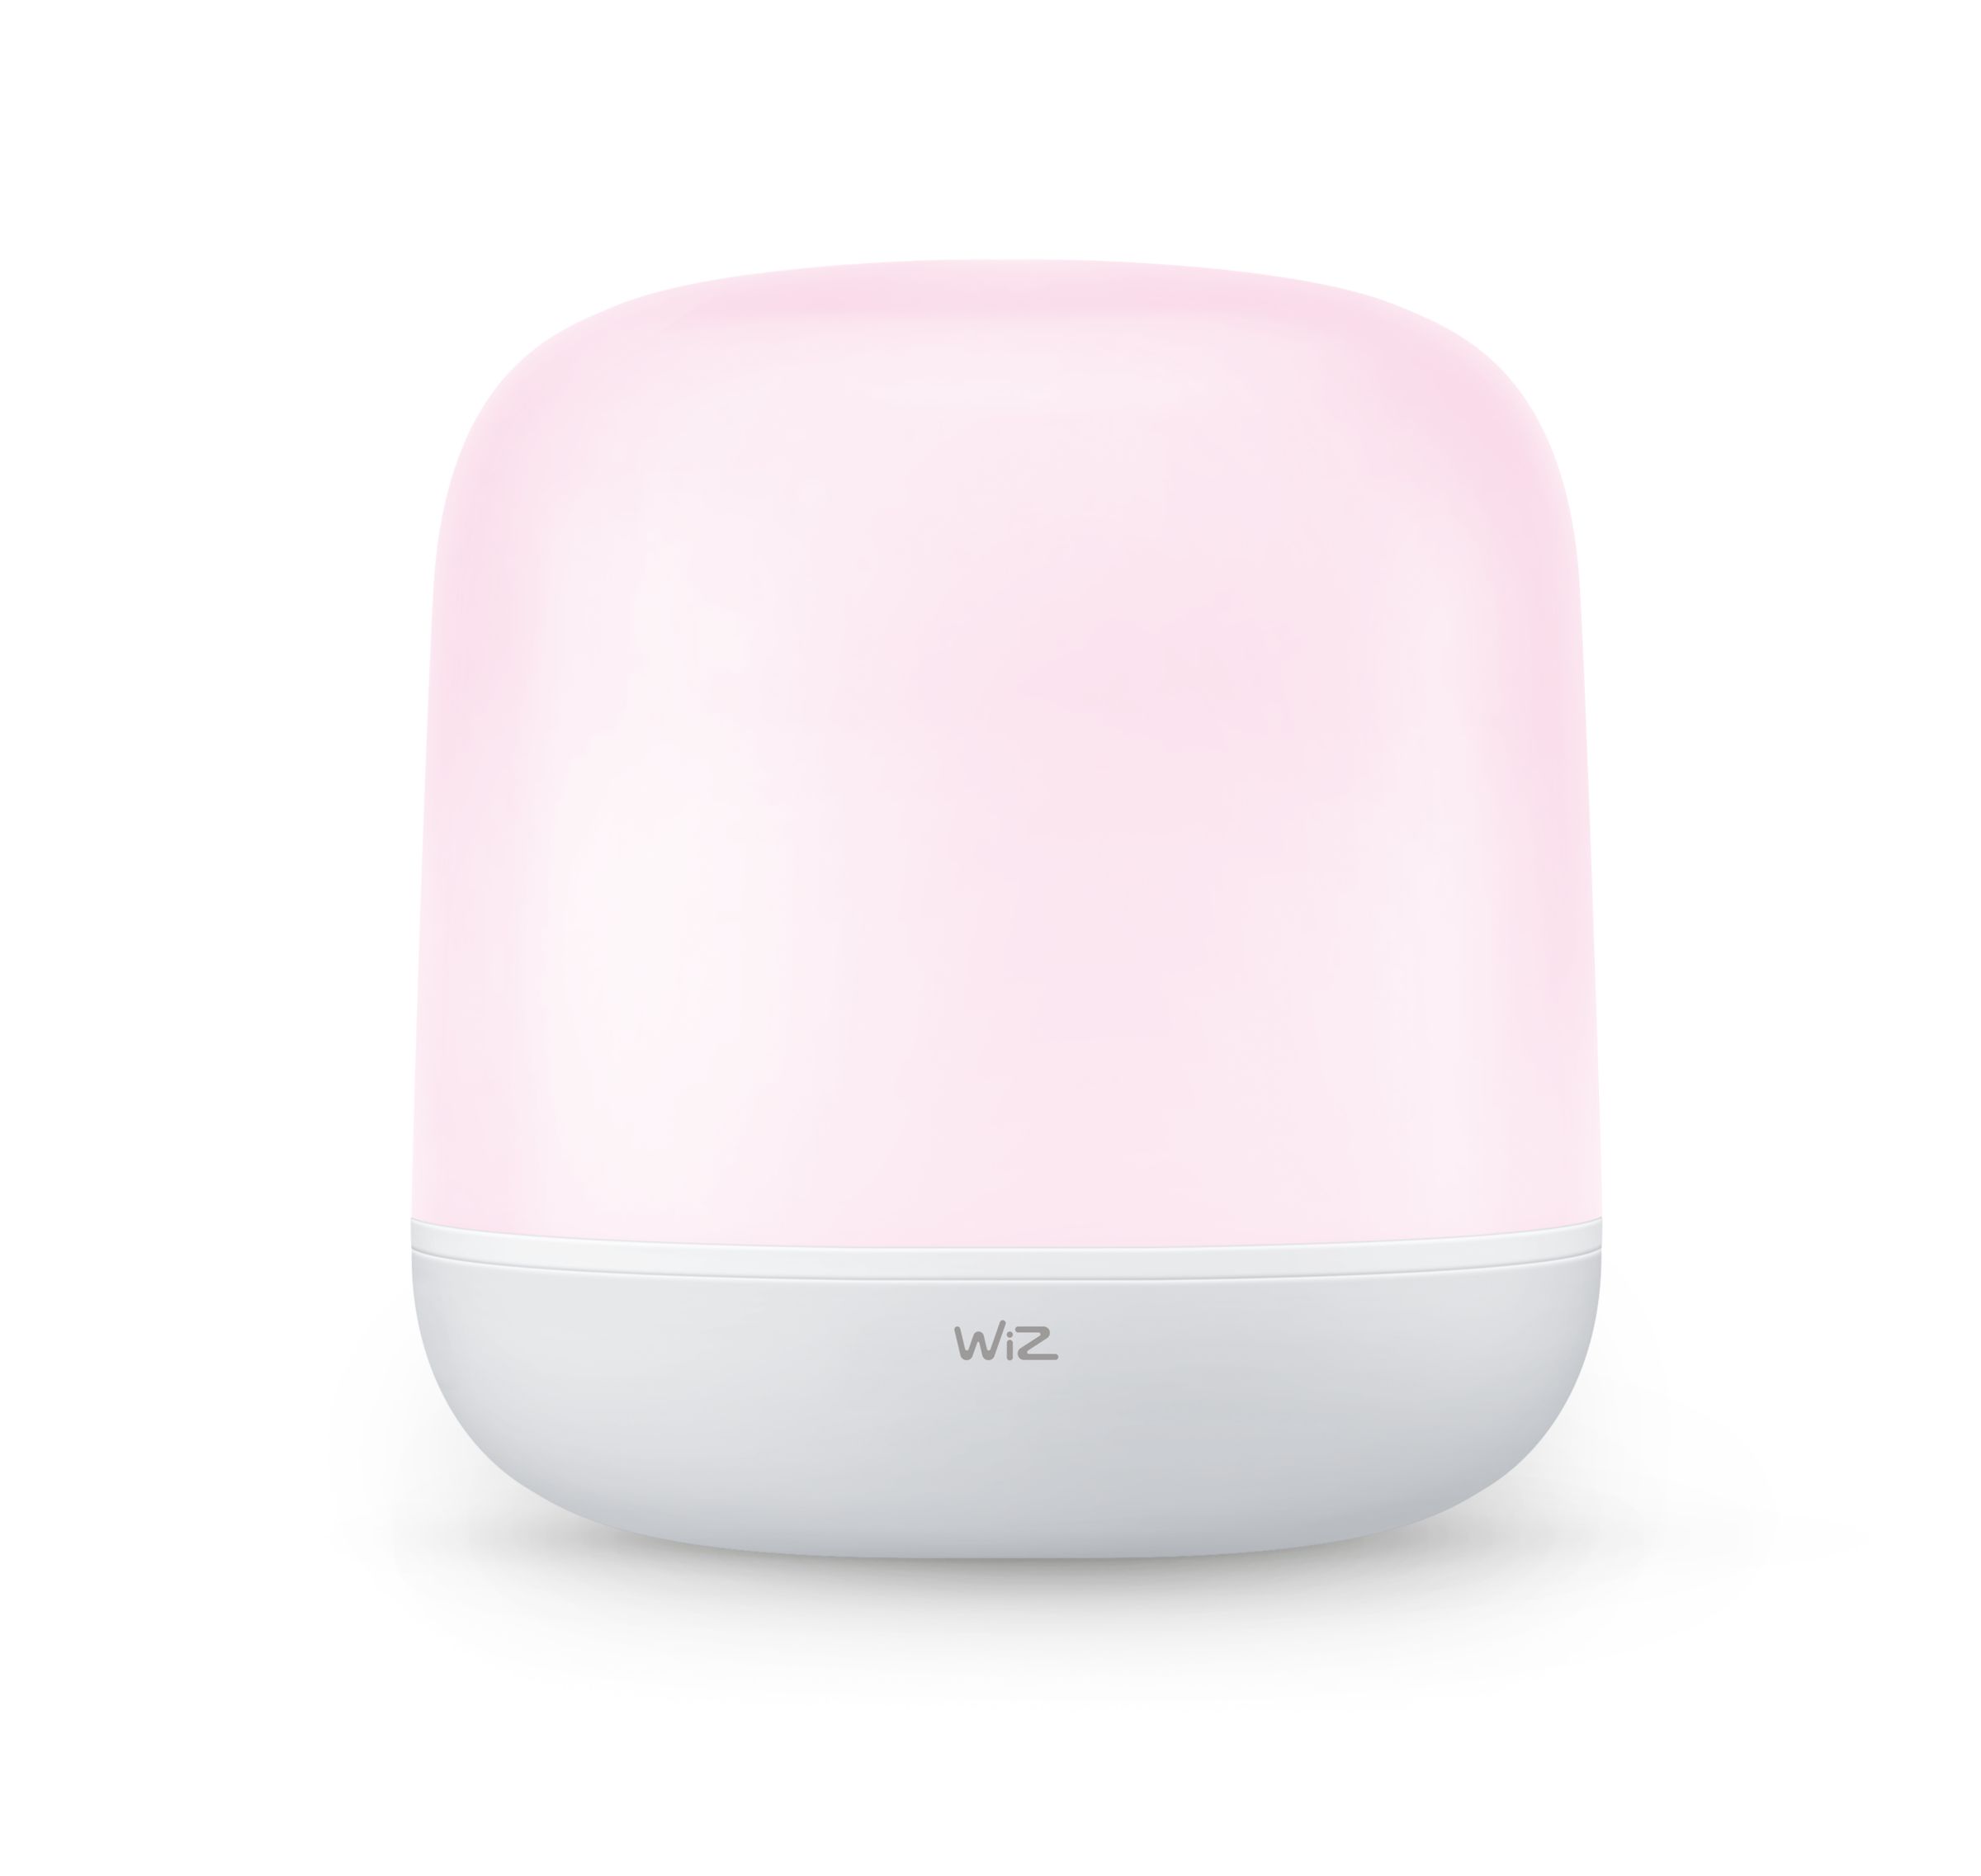 https://www.assets.signify.com/is/image/Signify/WIZ_WiFi_BLE_Portable_Hero_White-SPP